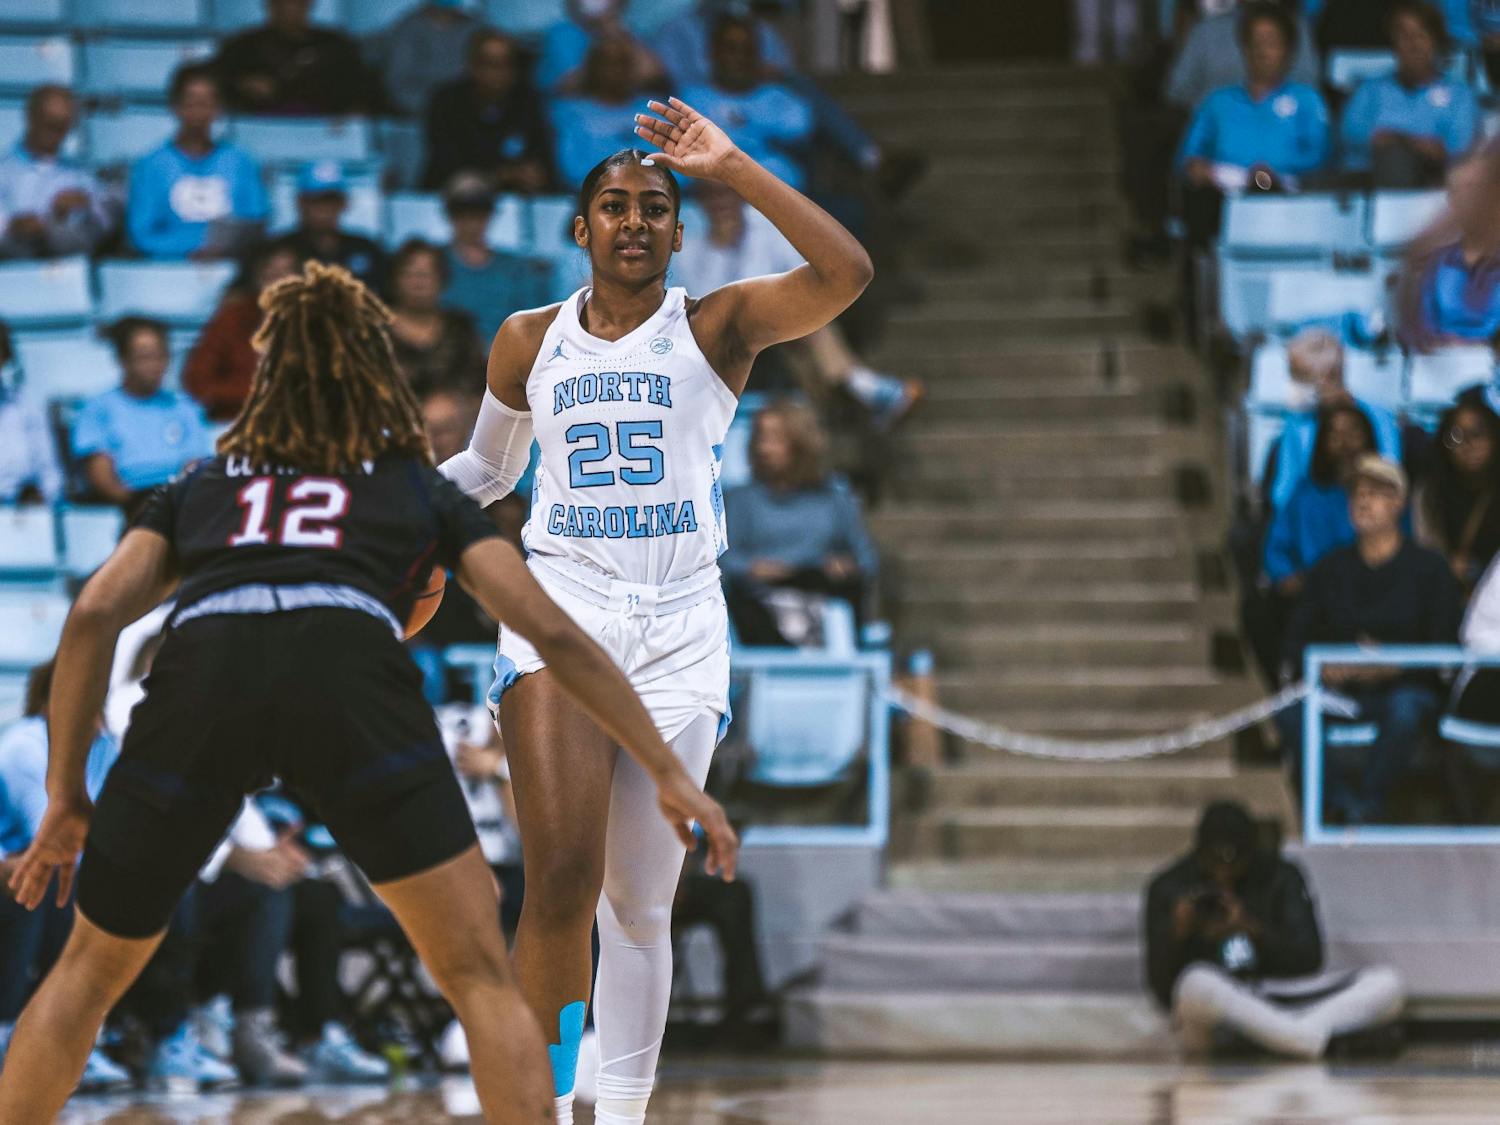 UNC junior guard Deja Kelly (25) motions to a teammate during the women's basketball game against Jackson State in Carmichael Arena on Wednesday, Nov. 9, 2022. UNC beat Jackson State 91-51.